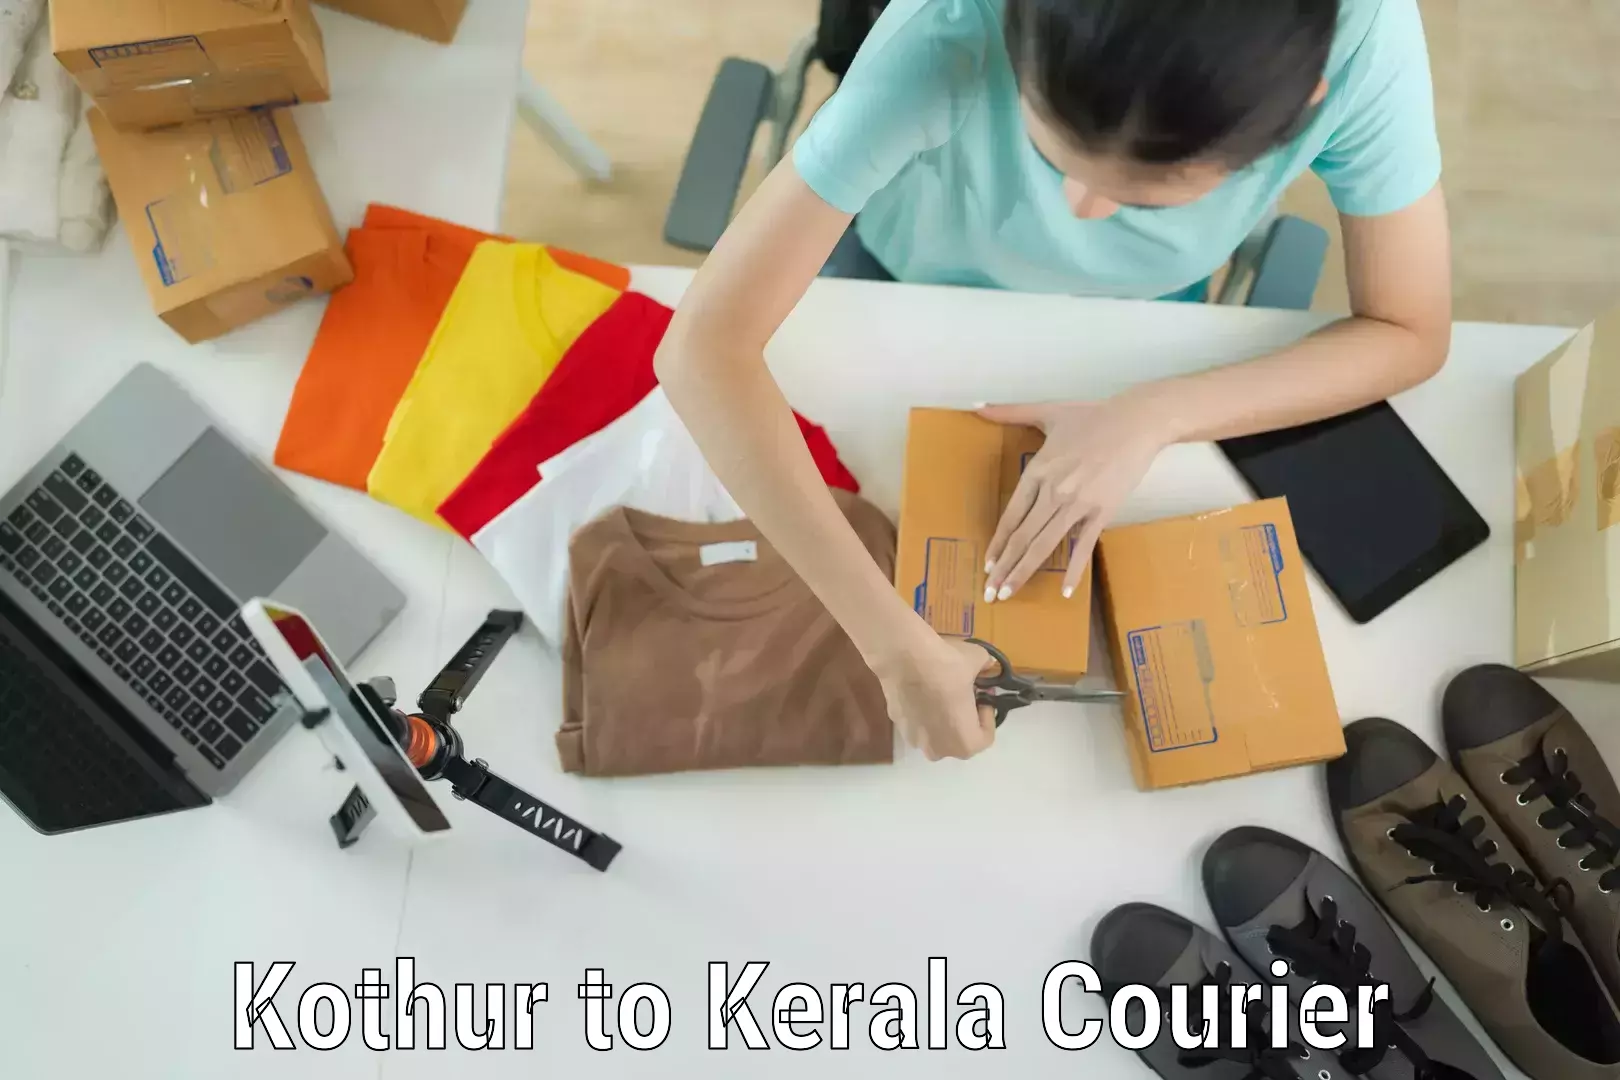 Quick luggage shipment in Kothur to Kochi